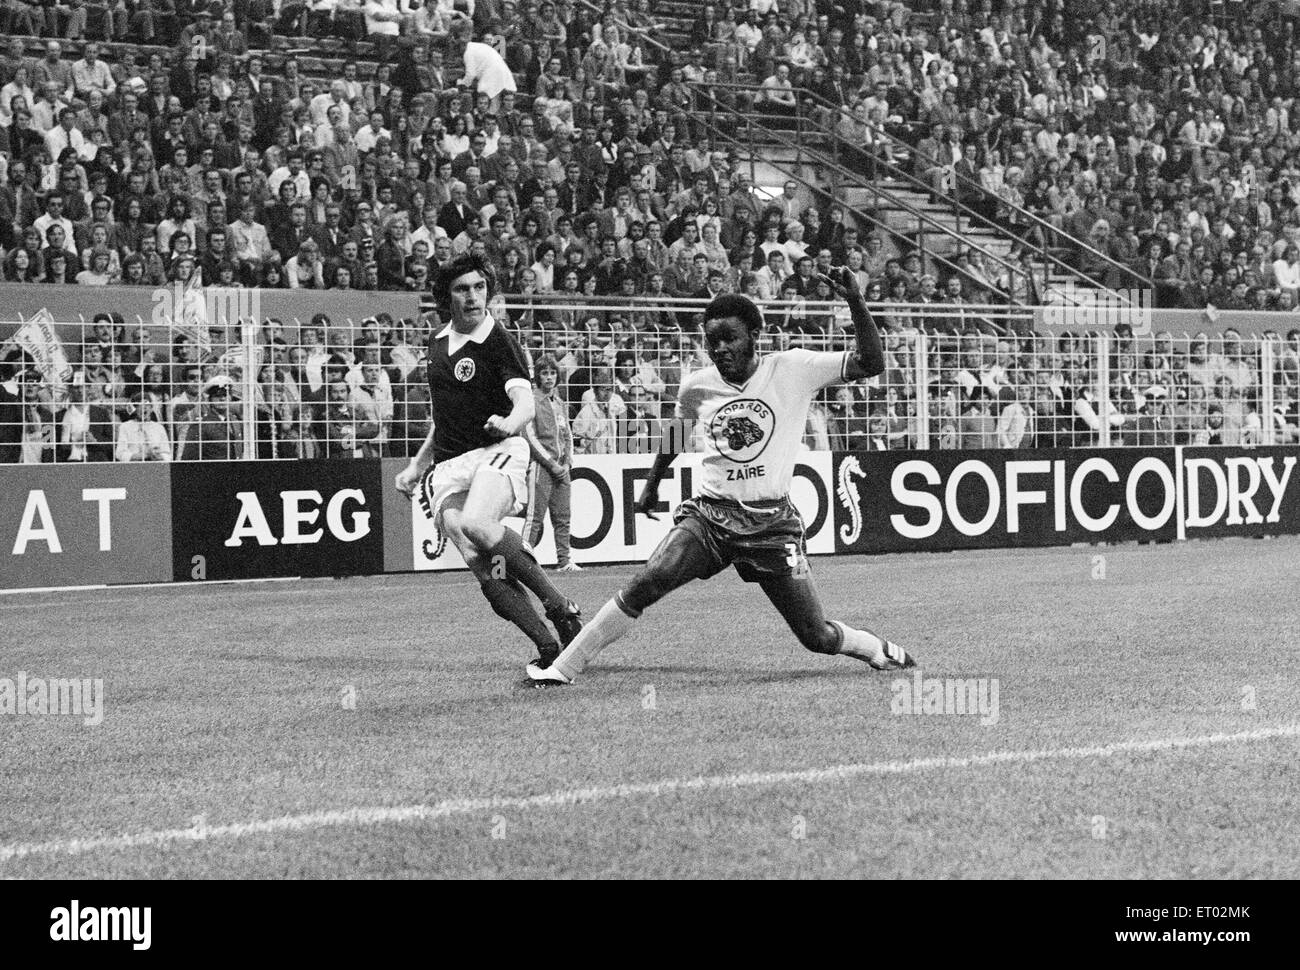 1974 World Cup First Round Group Two match at the Westfalenstadion, Dortmund, West Germany. Zaire 0 v Scotland 2. Peter Lorimer crosses the ball past  Mwanaza Nel Nokumbo. 14th June 1974. Stock Photo